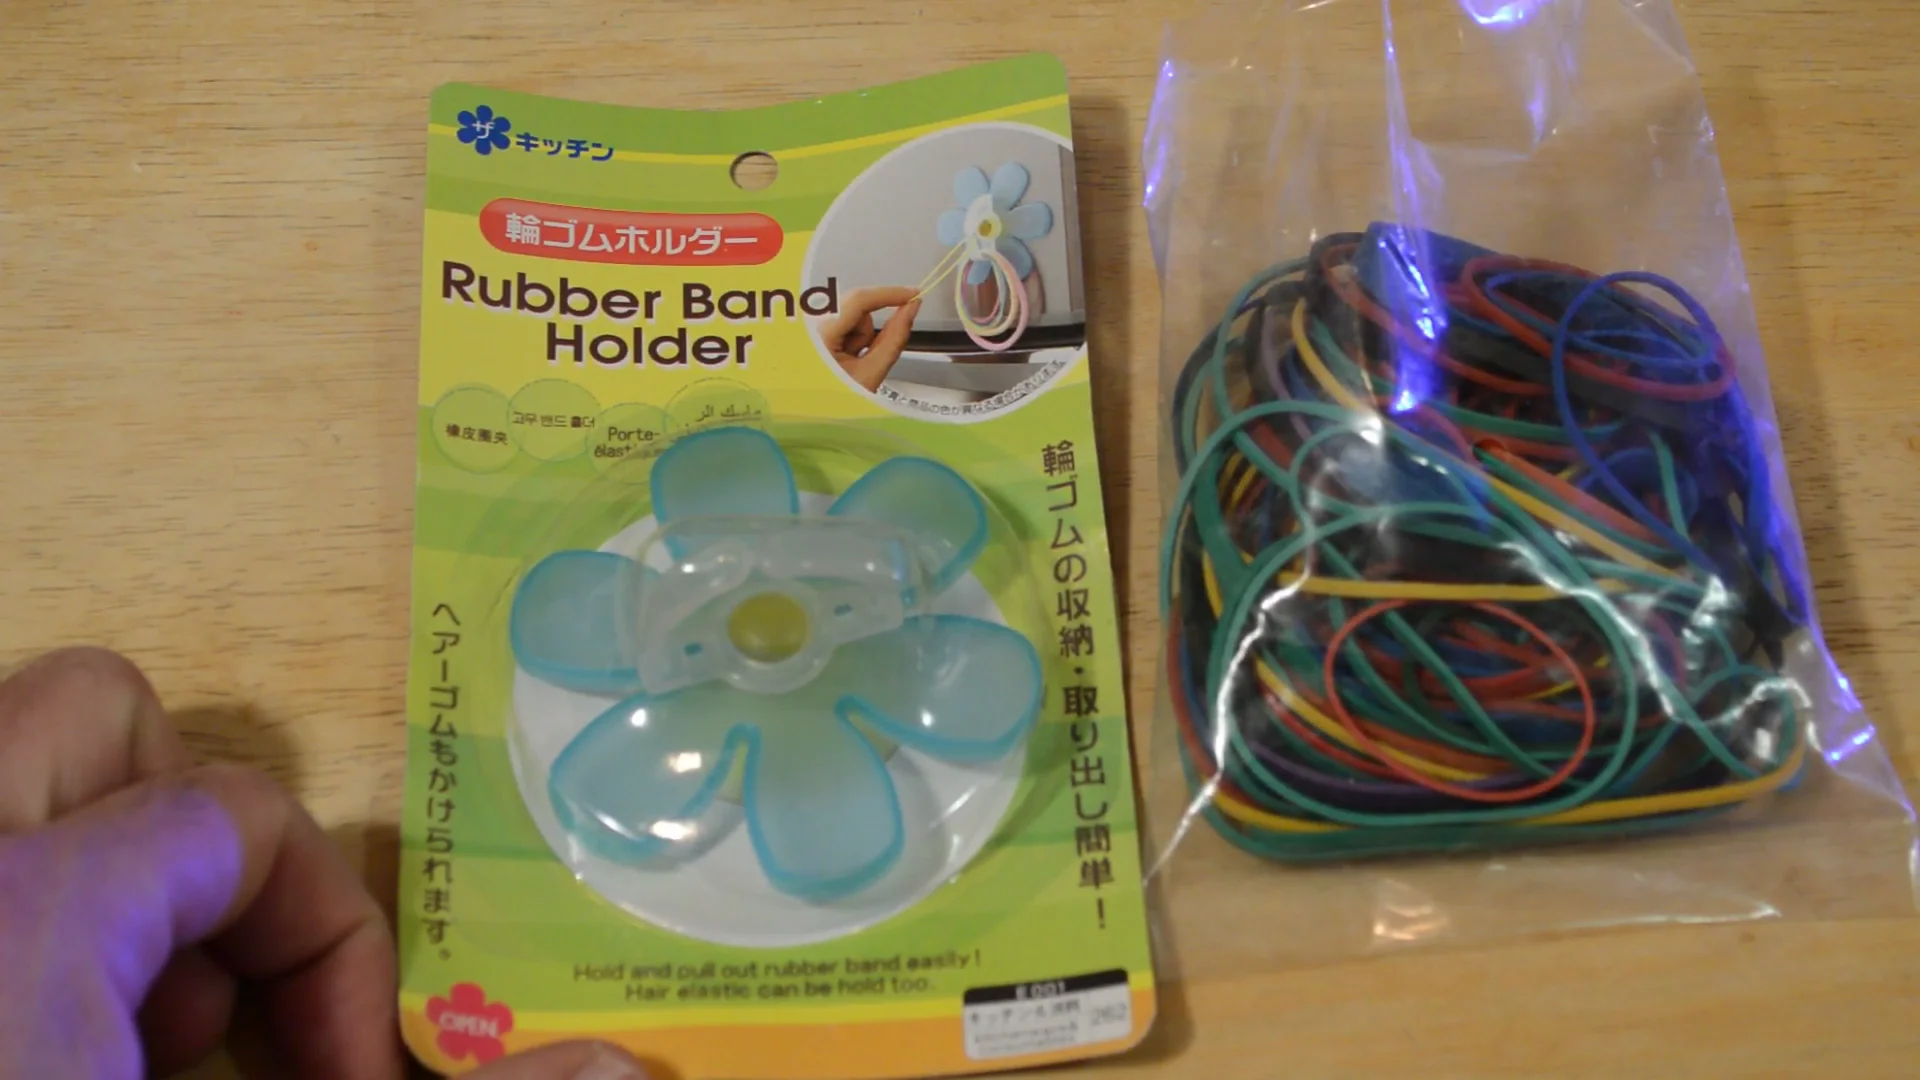 Daiso Rubber Band Hair Tie Holder Gadget Review on Vimeo